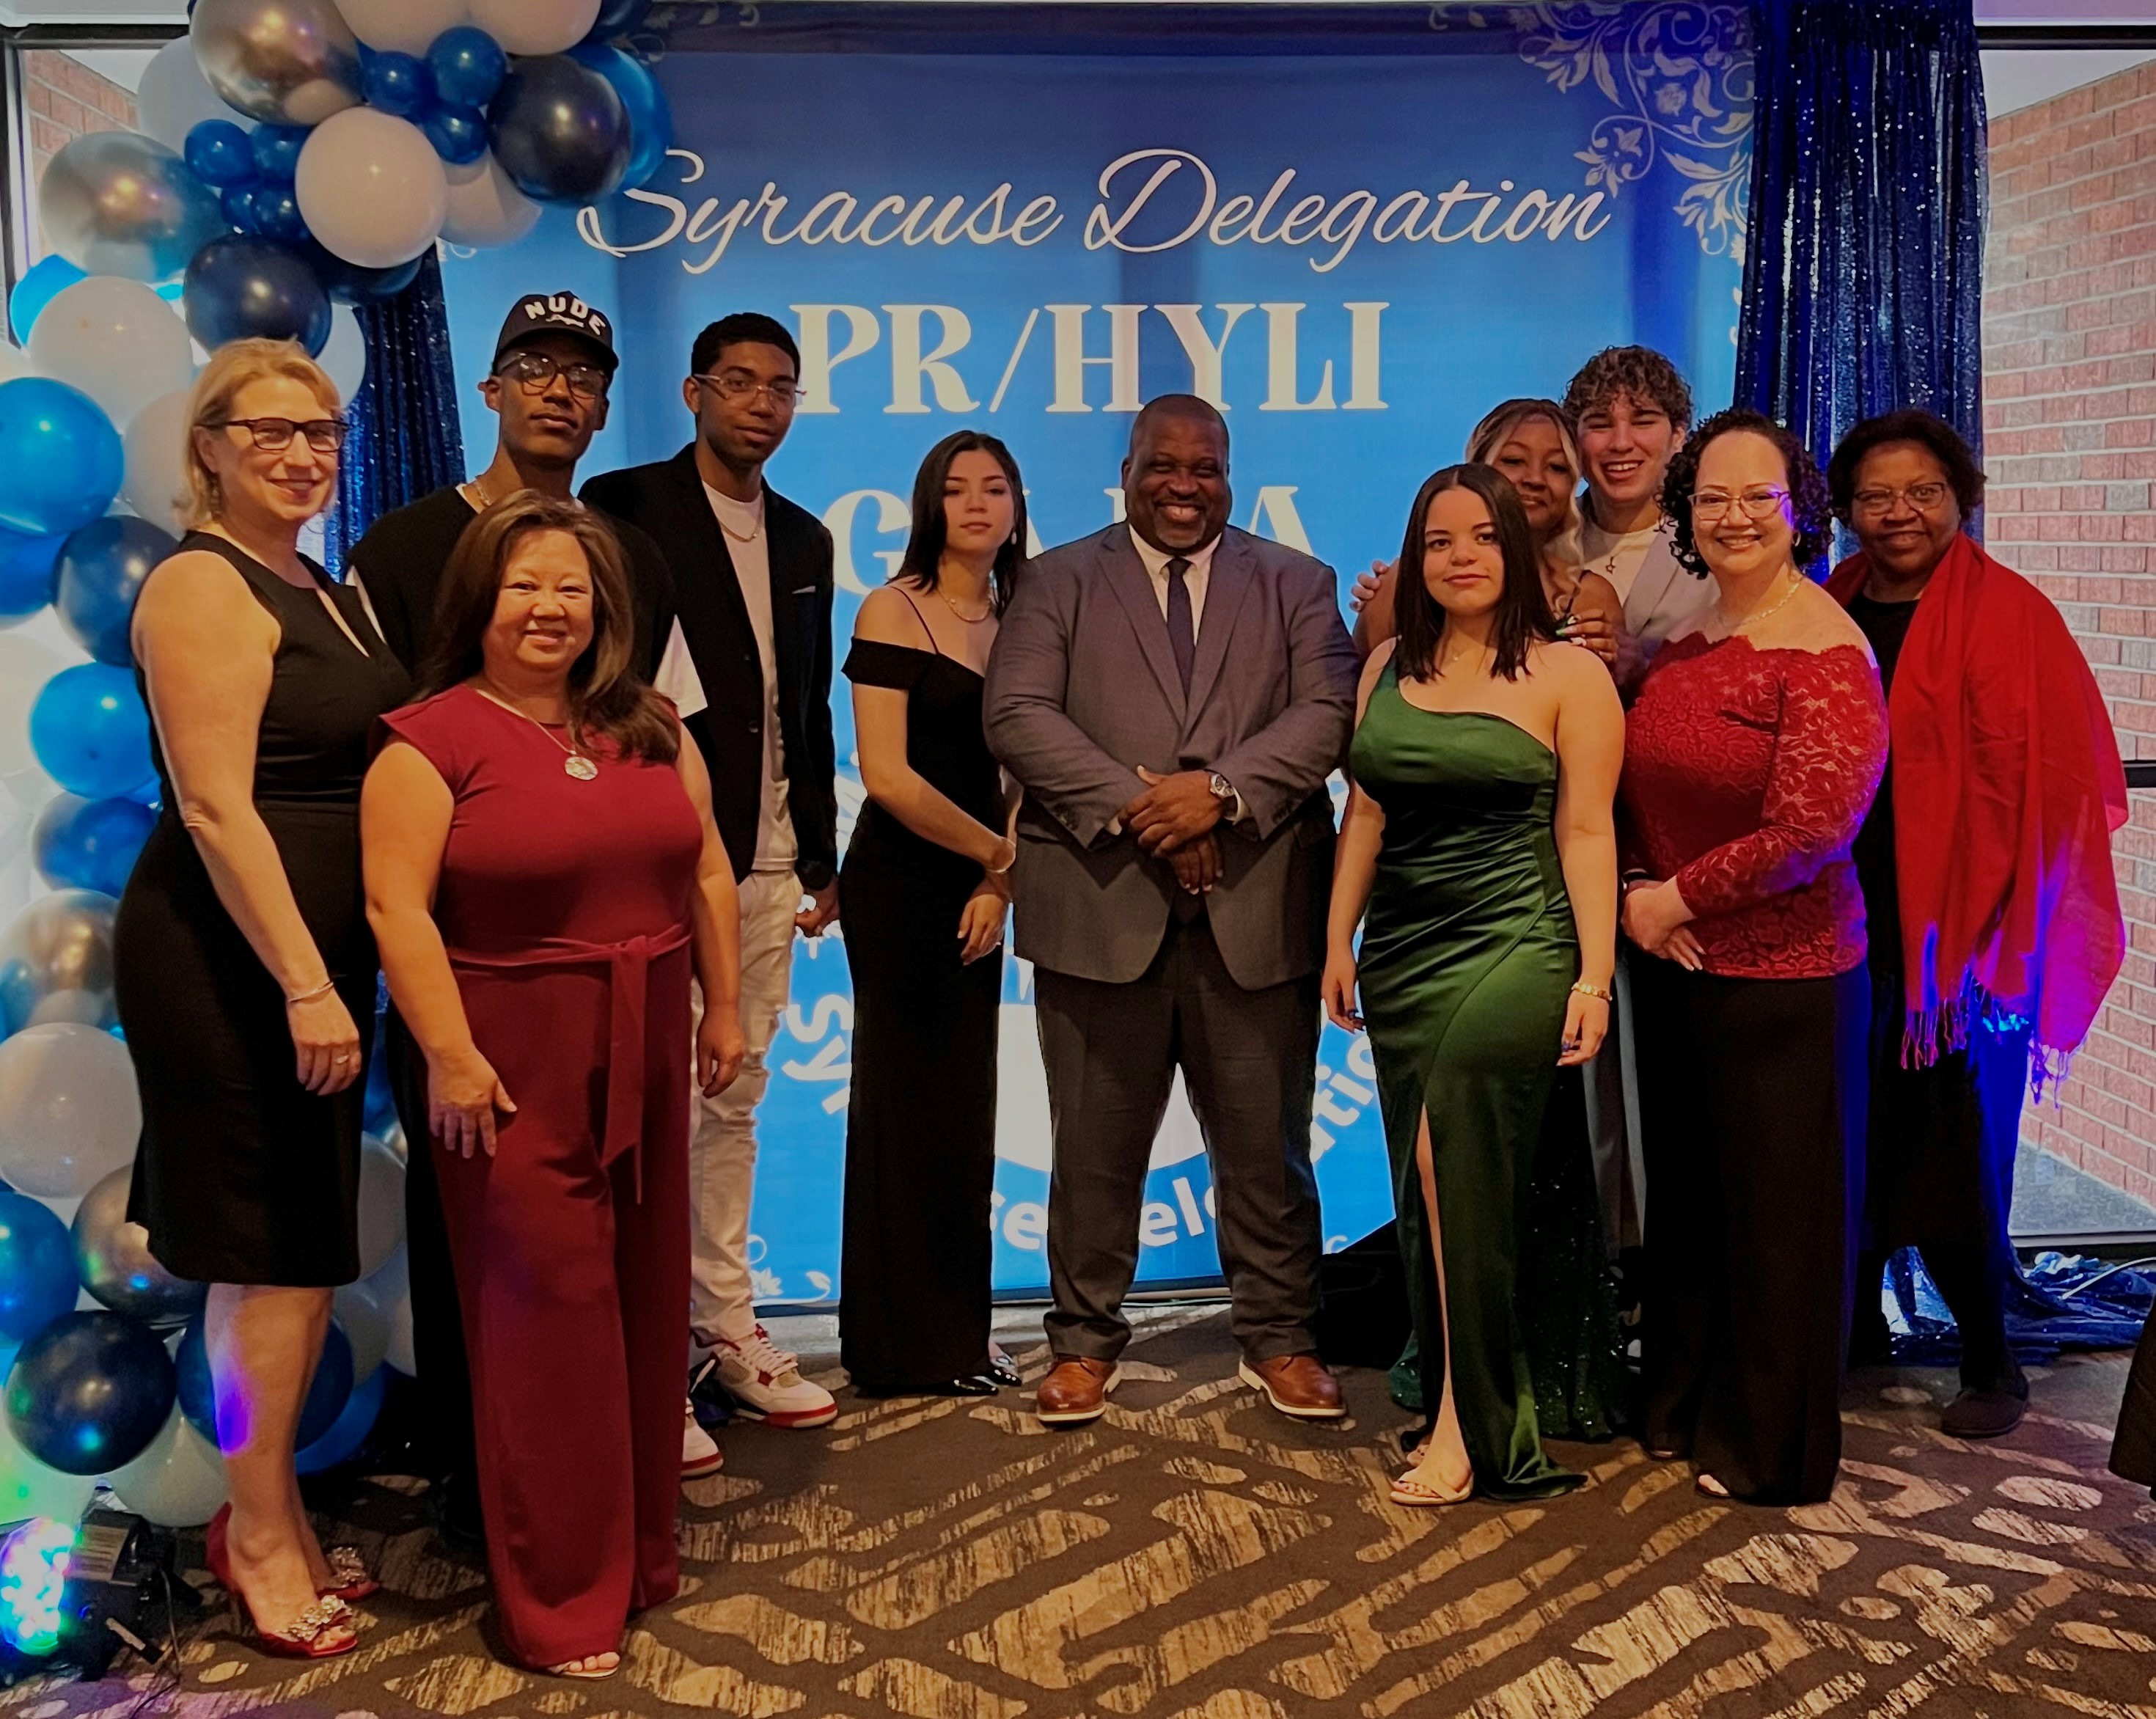 This is a photo of students and staff attending the PRHYLI Gala, wearing formal gear and smiling at the camera.